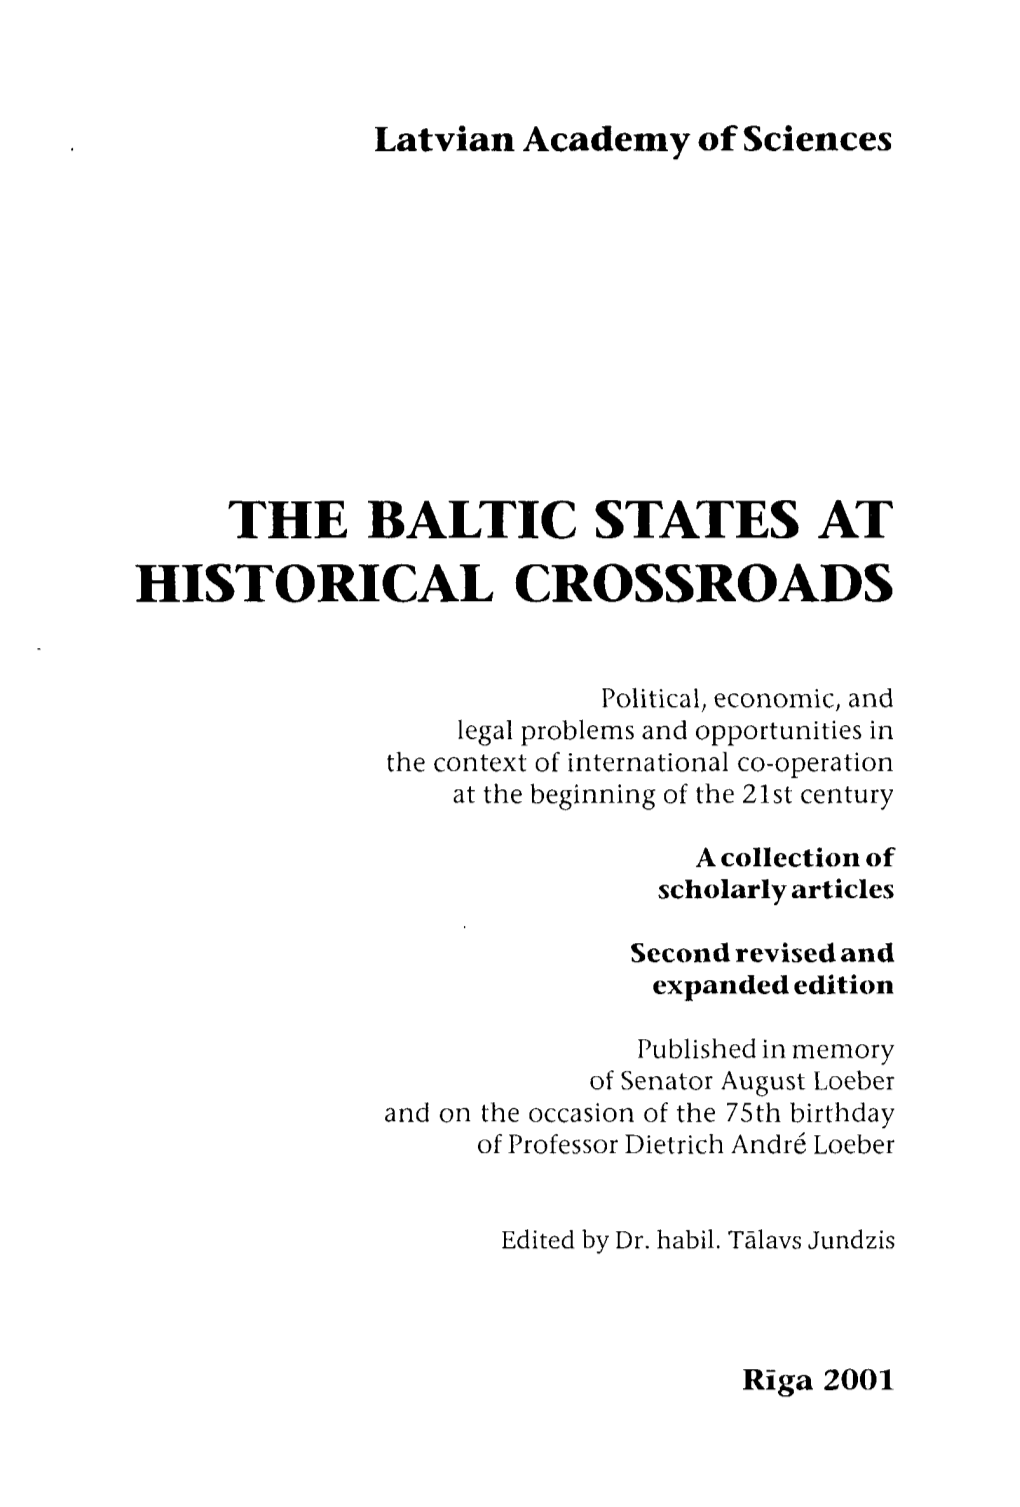 The Baltic States at Historical Crossroads